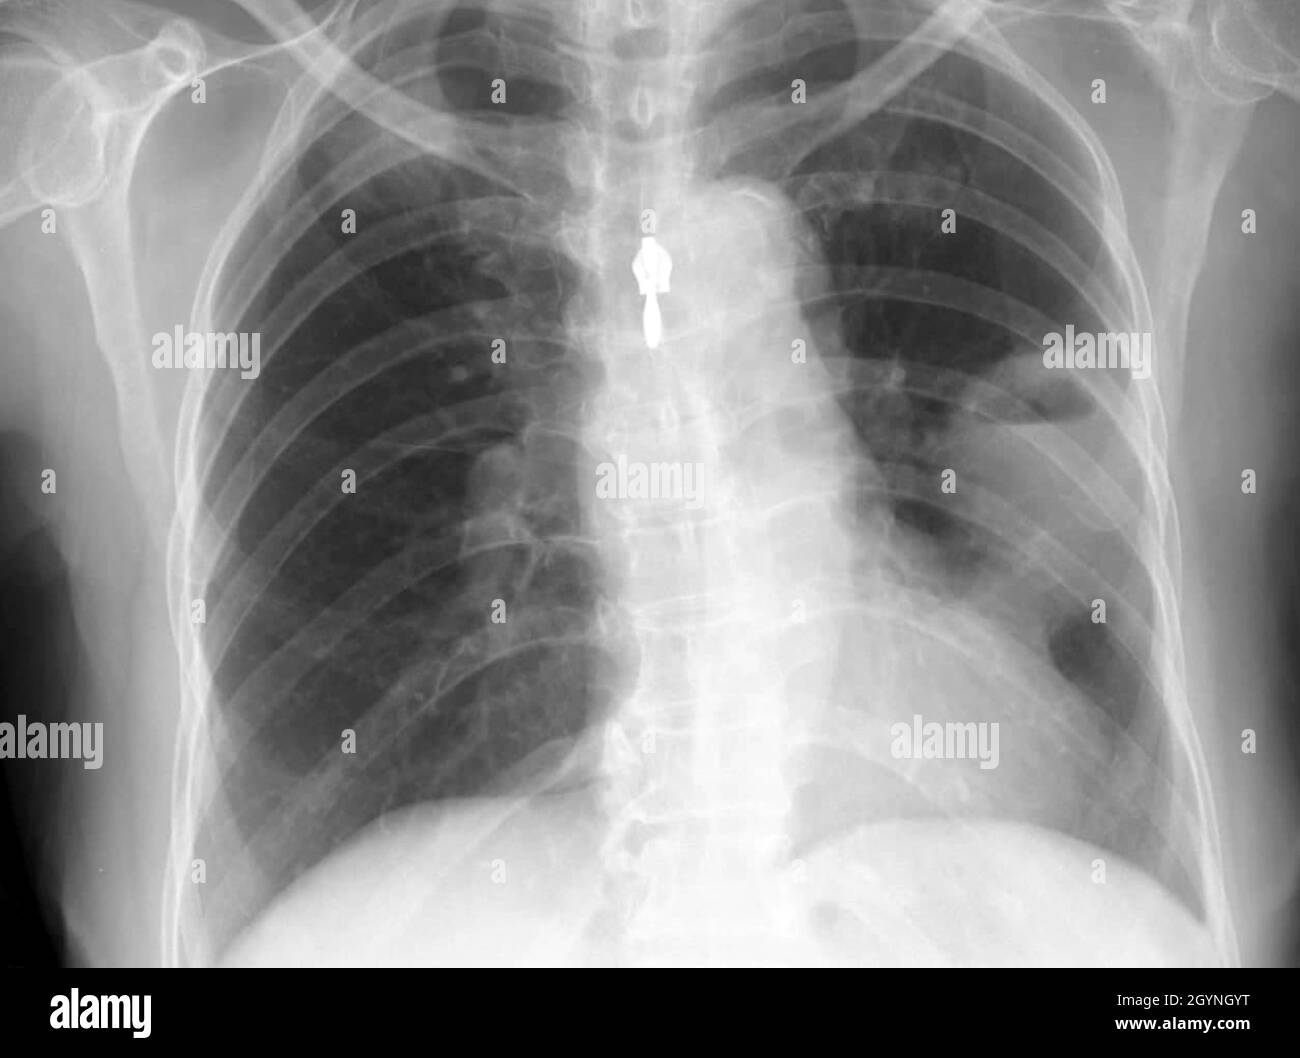 Lung abscess, X-ray Stock Photo